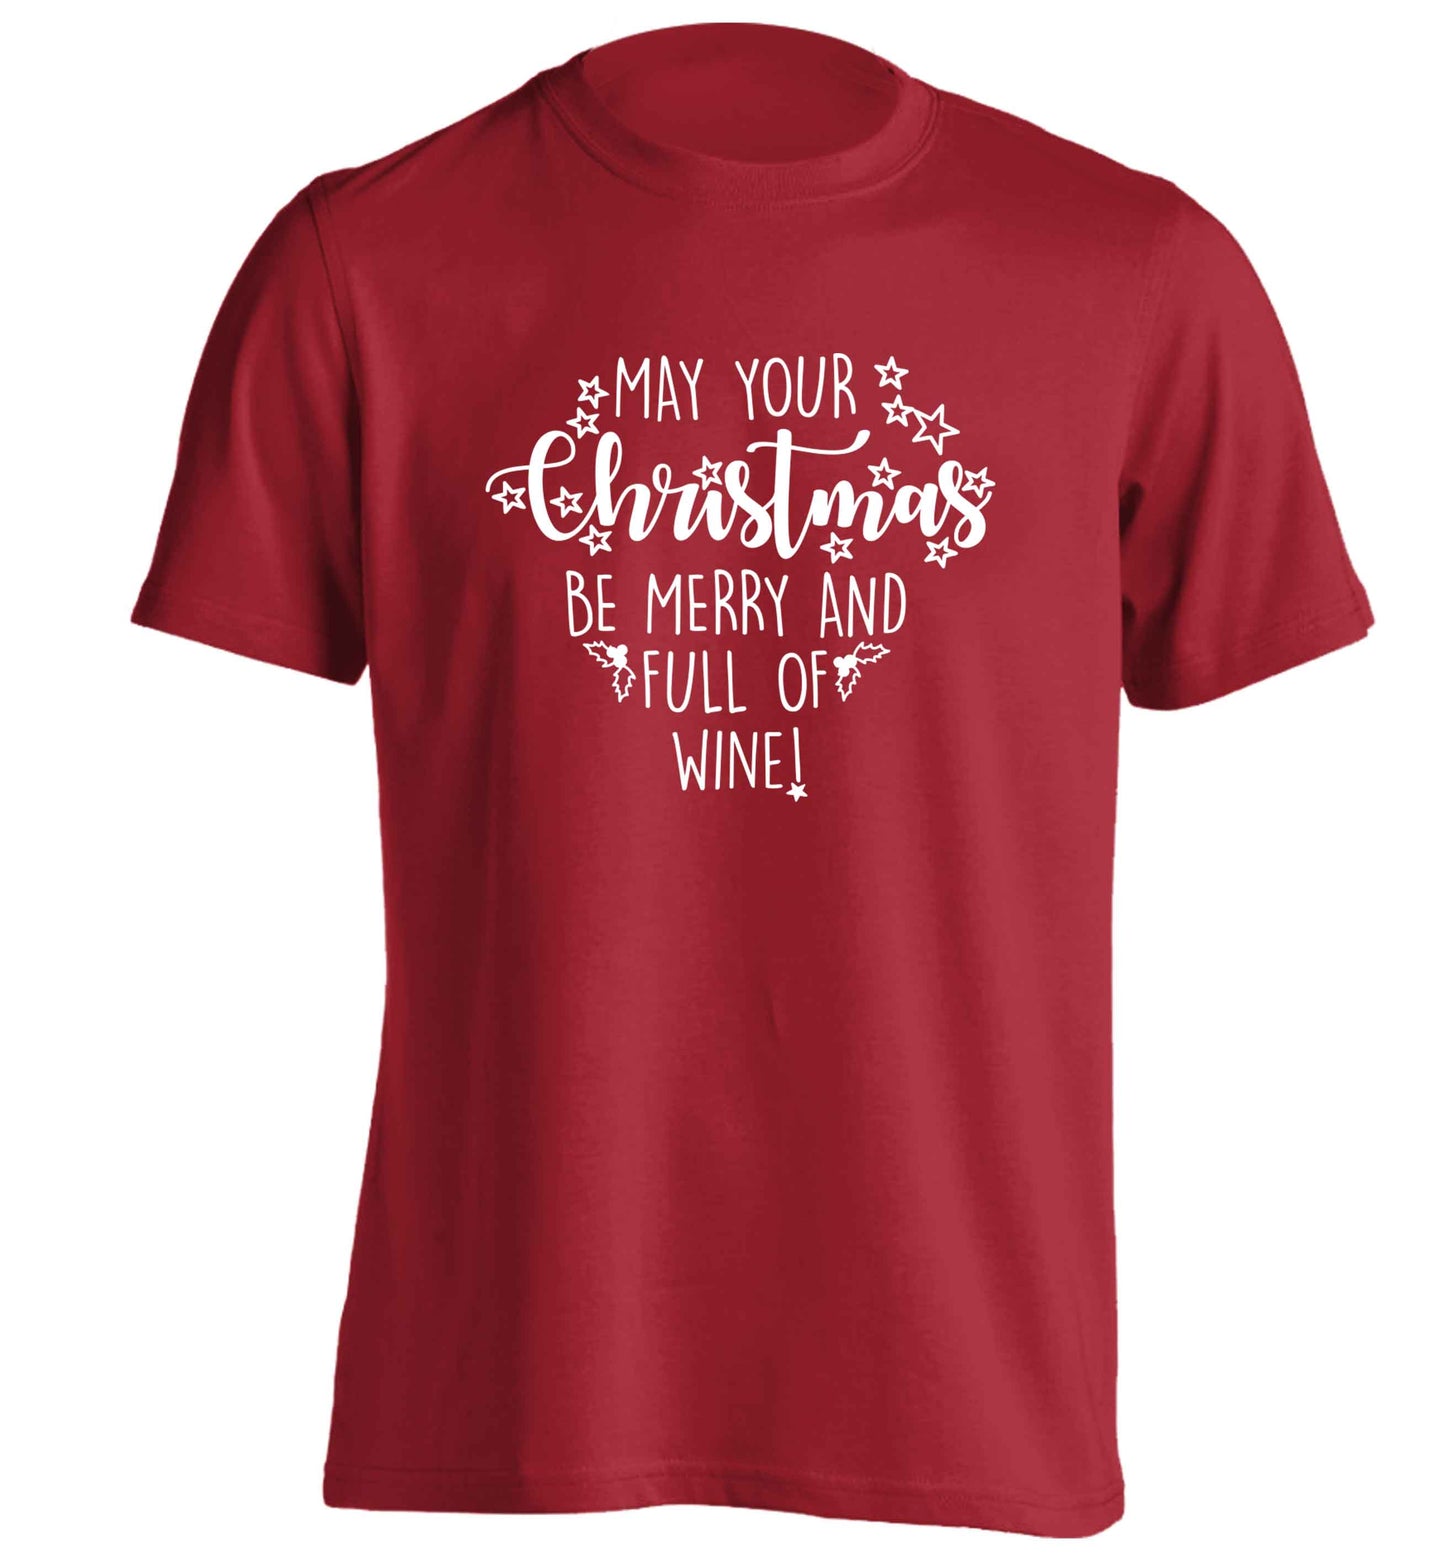 May your Christmas be merry and full of wine adults unisex red Tshirt 2XL